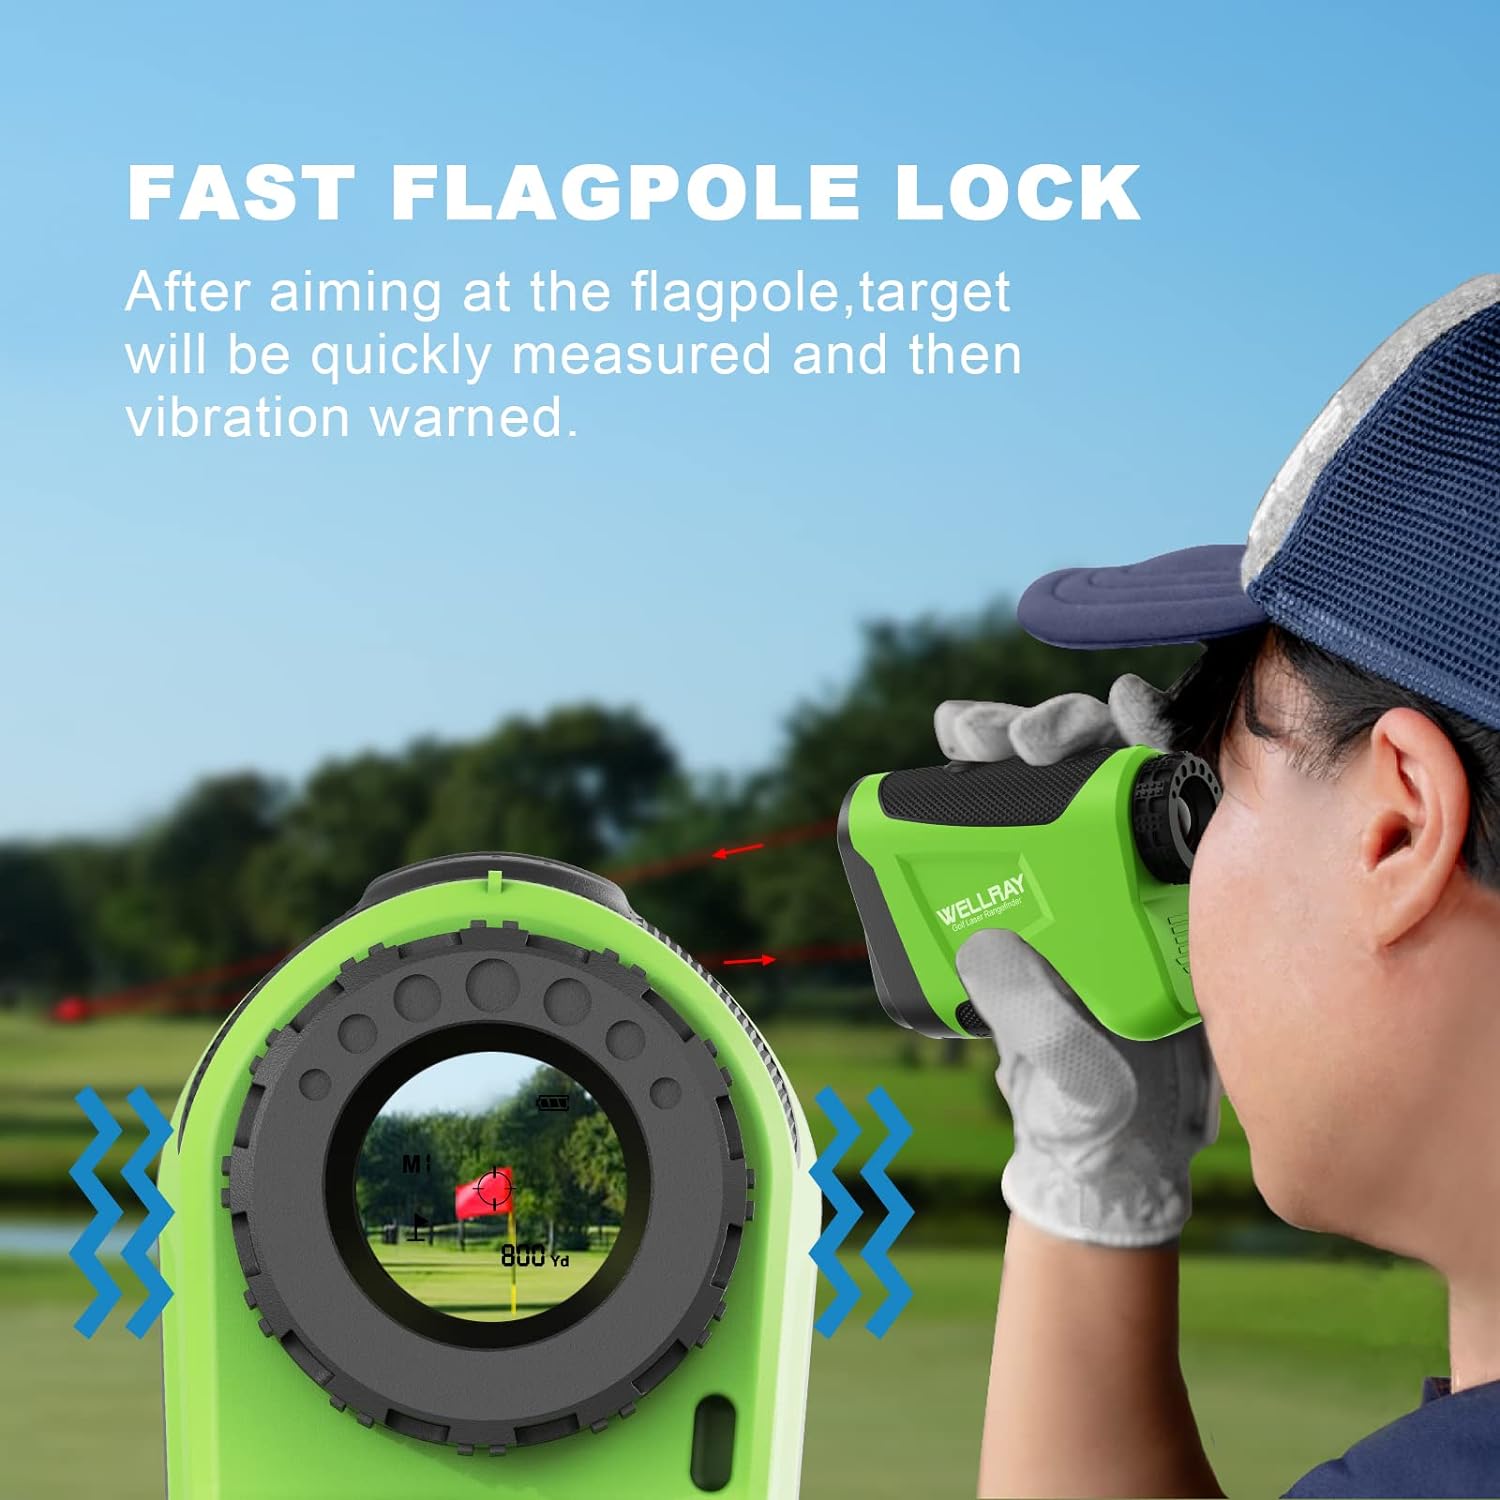 Golf Rangefinder,Wellray Laser Golf Range Finder with Slope,High-Precision 650 Yards Range Finder Devices with 6X Magnification & Flag Pole Locking Vibration Function,Golf Accessories for Men,4 Modes